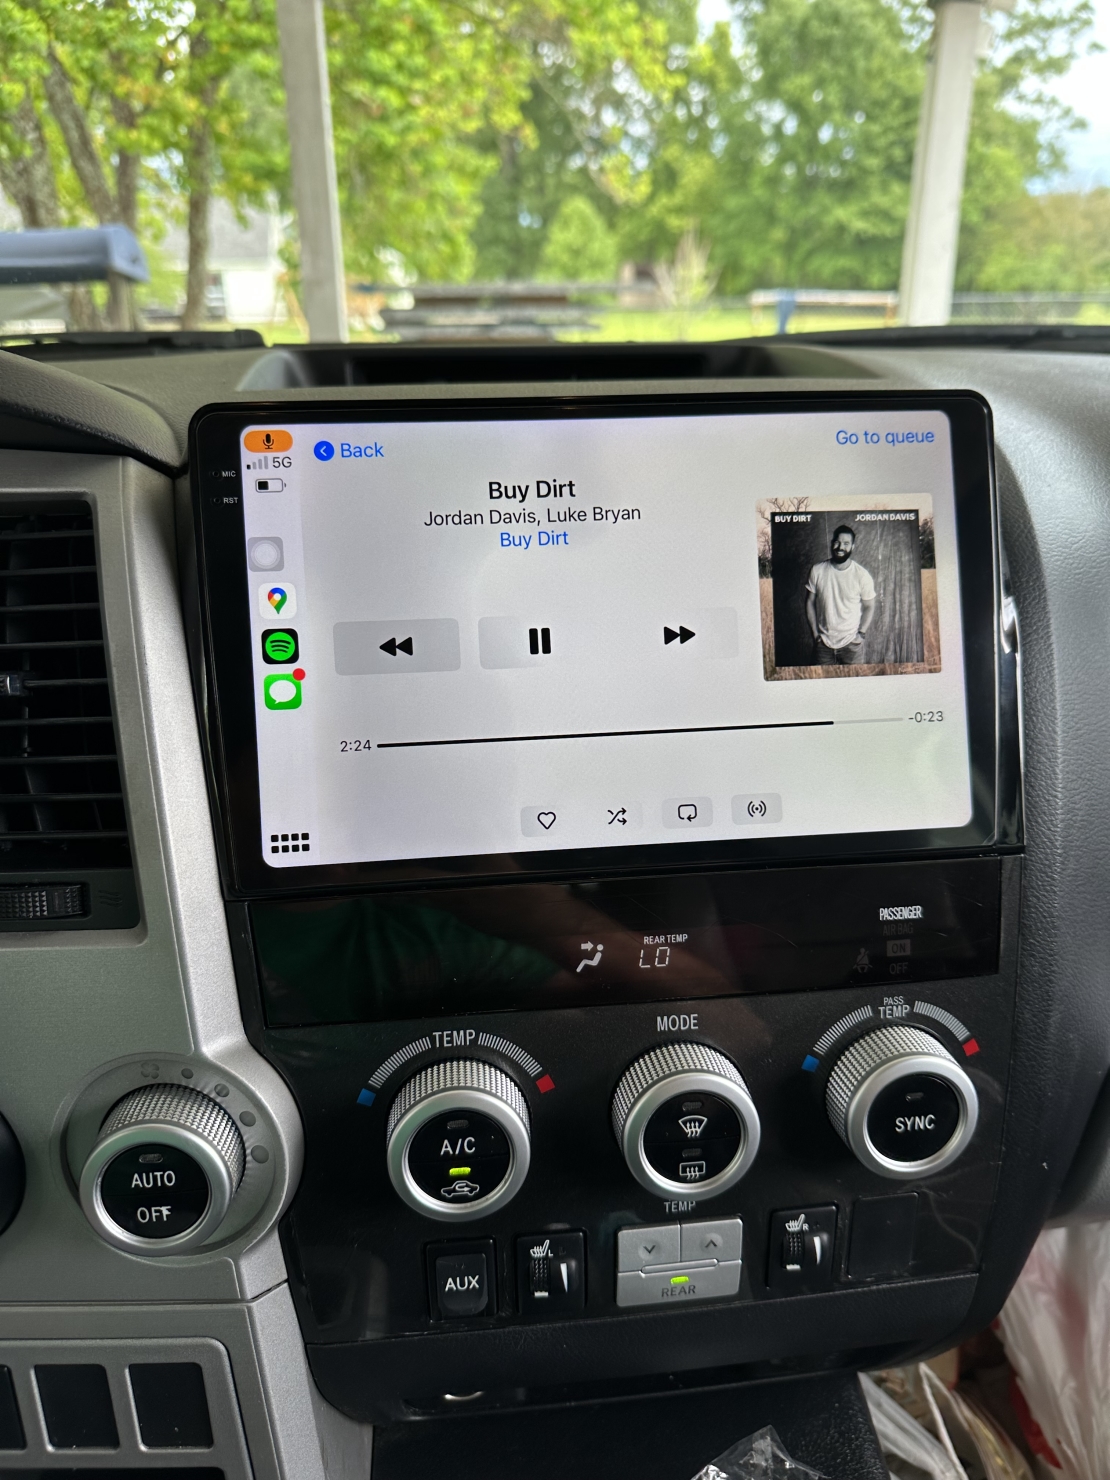 Toyota Tundra/Sequoia 2007- 2013 Android Multimedia/Navigation